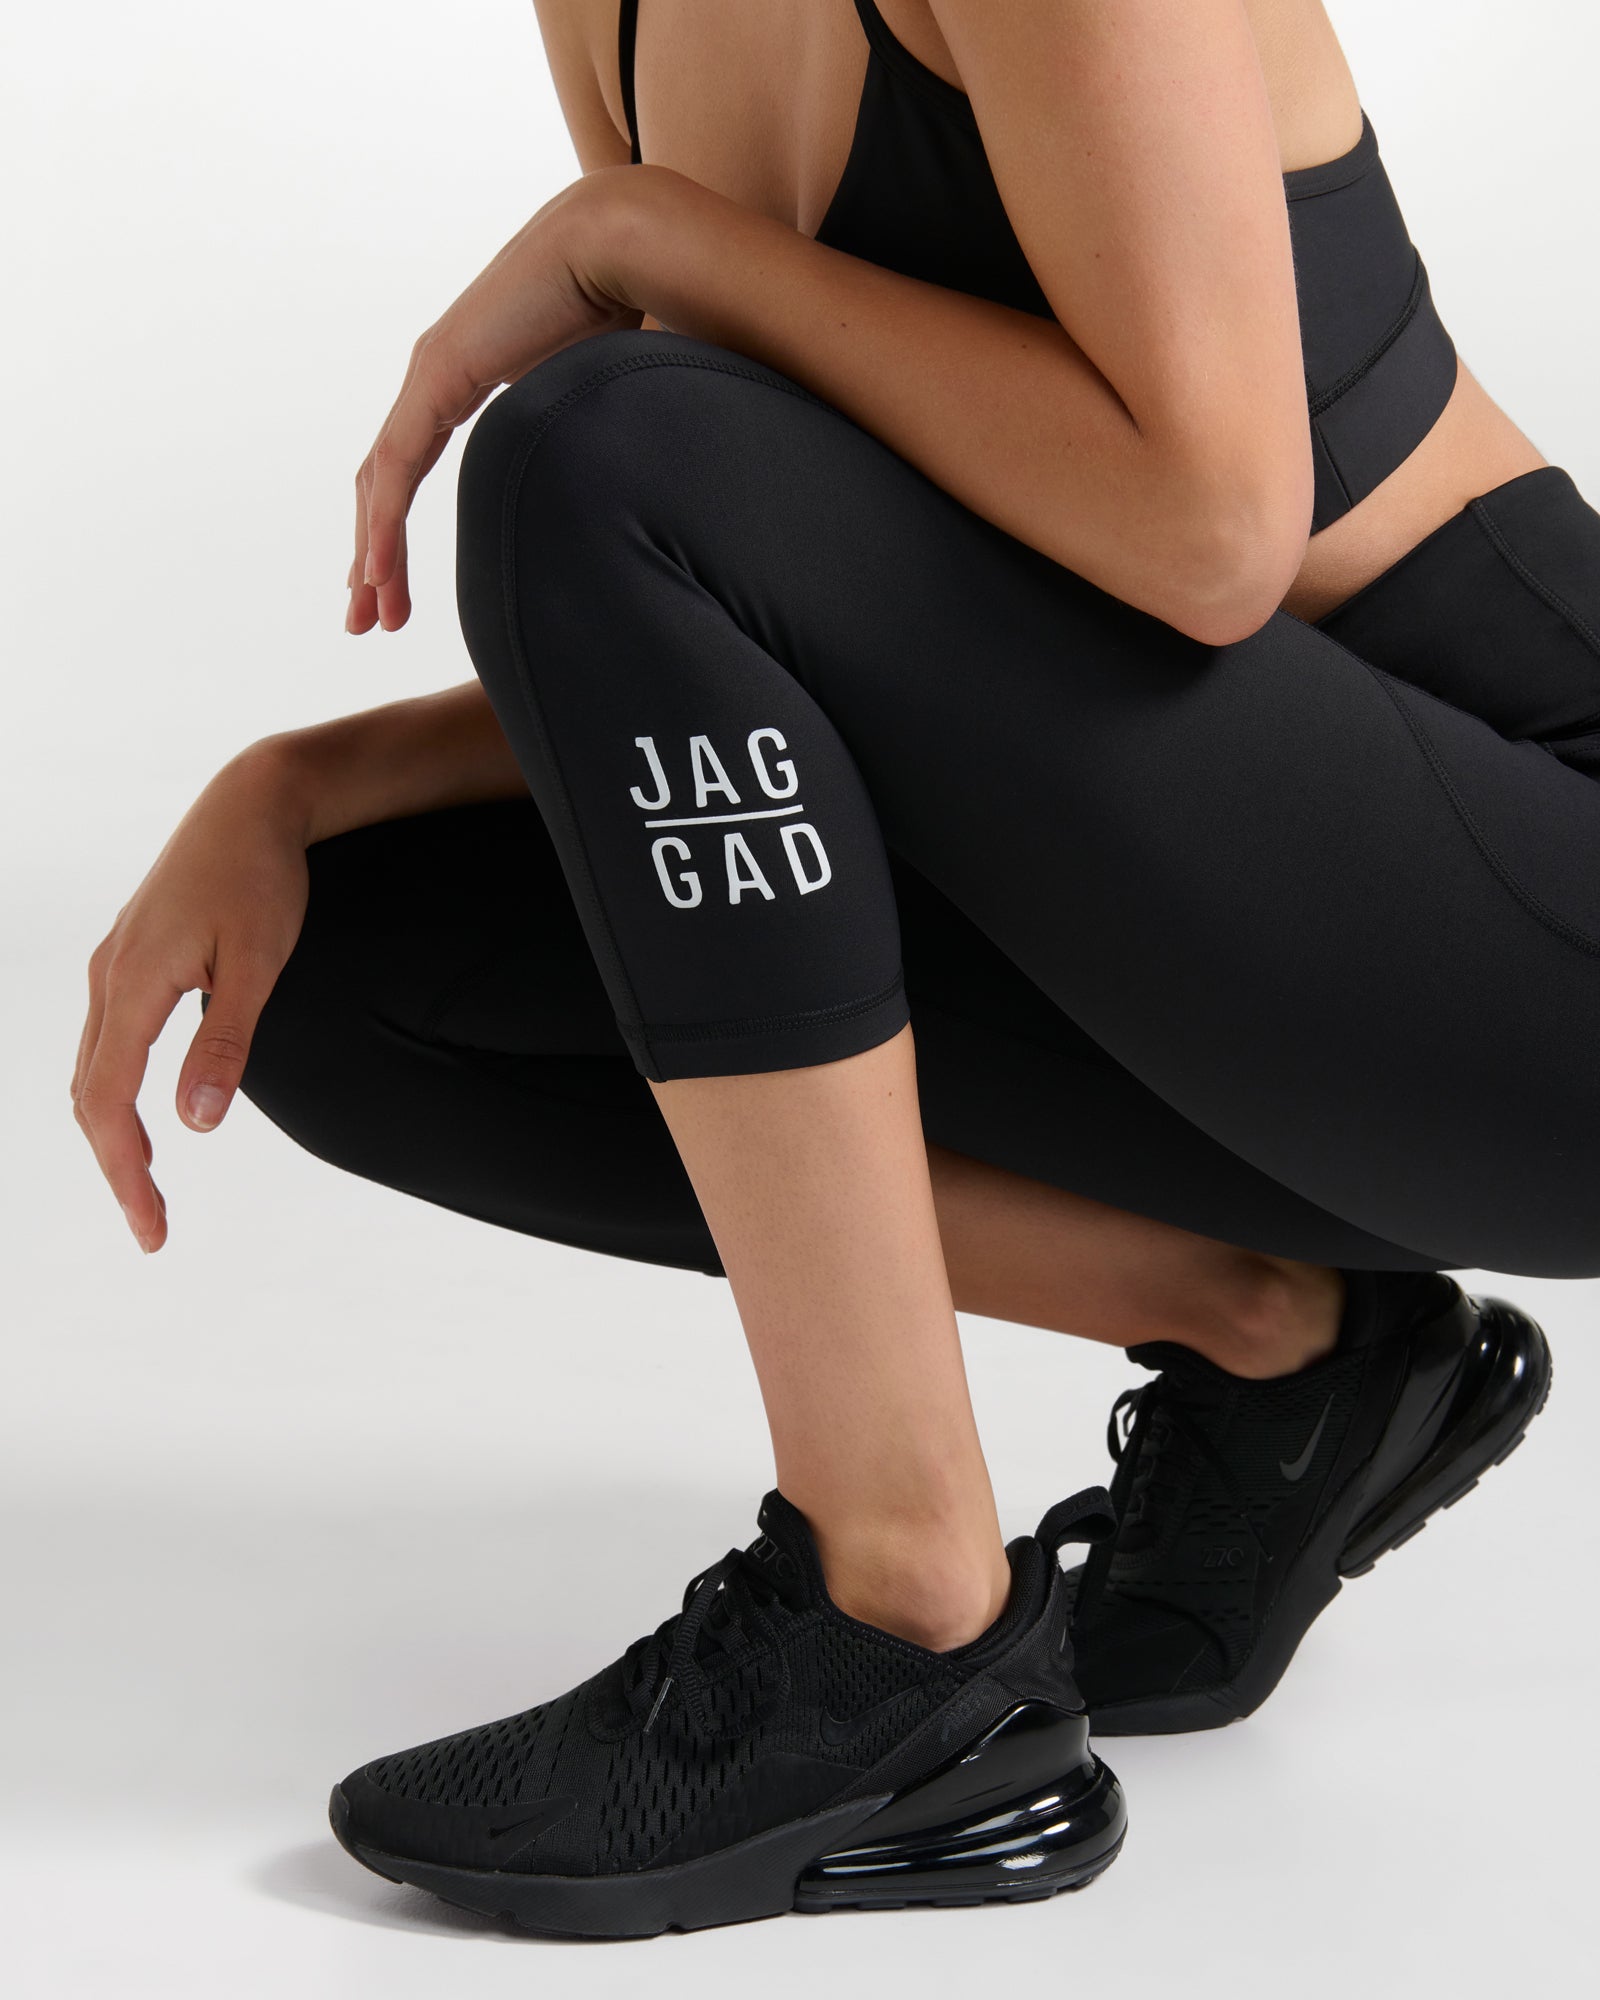 High Waist Tapered Joggers With Pocket Tanks For Women Ideal For Running,  Yoga, Gym And Workouts From Xiaobaigou, $20.44